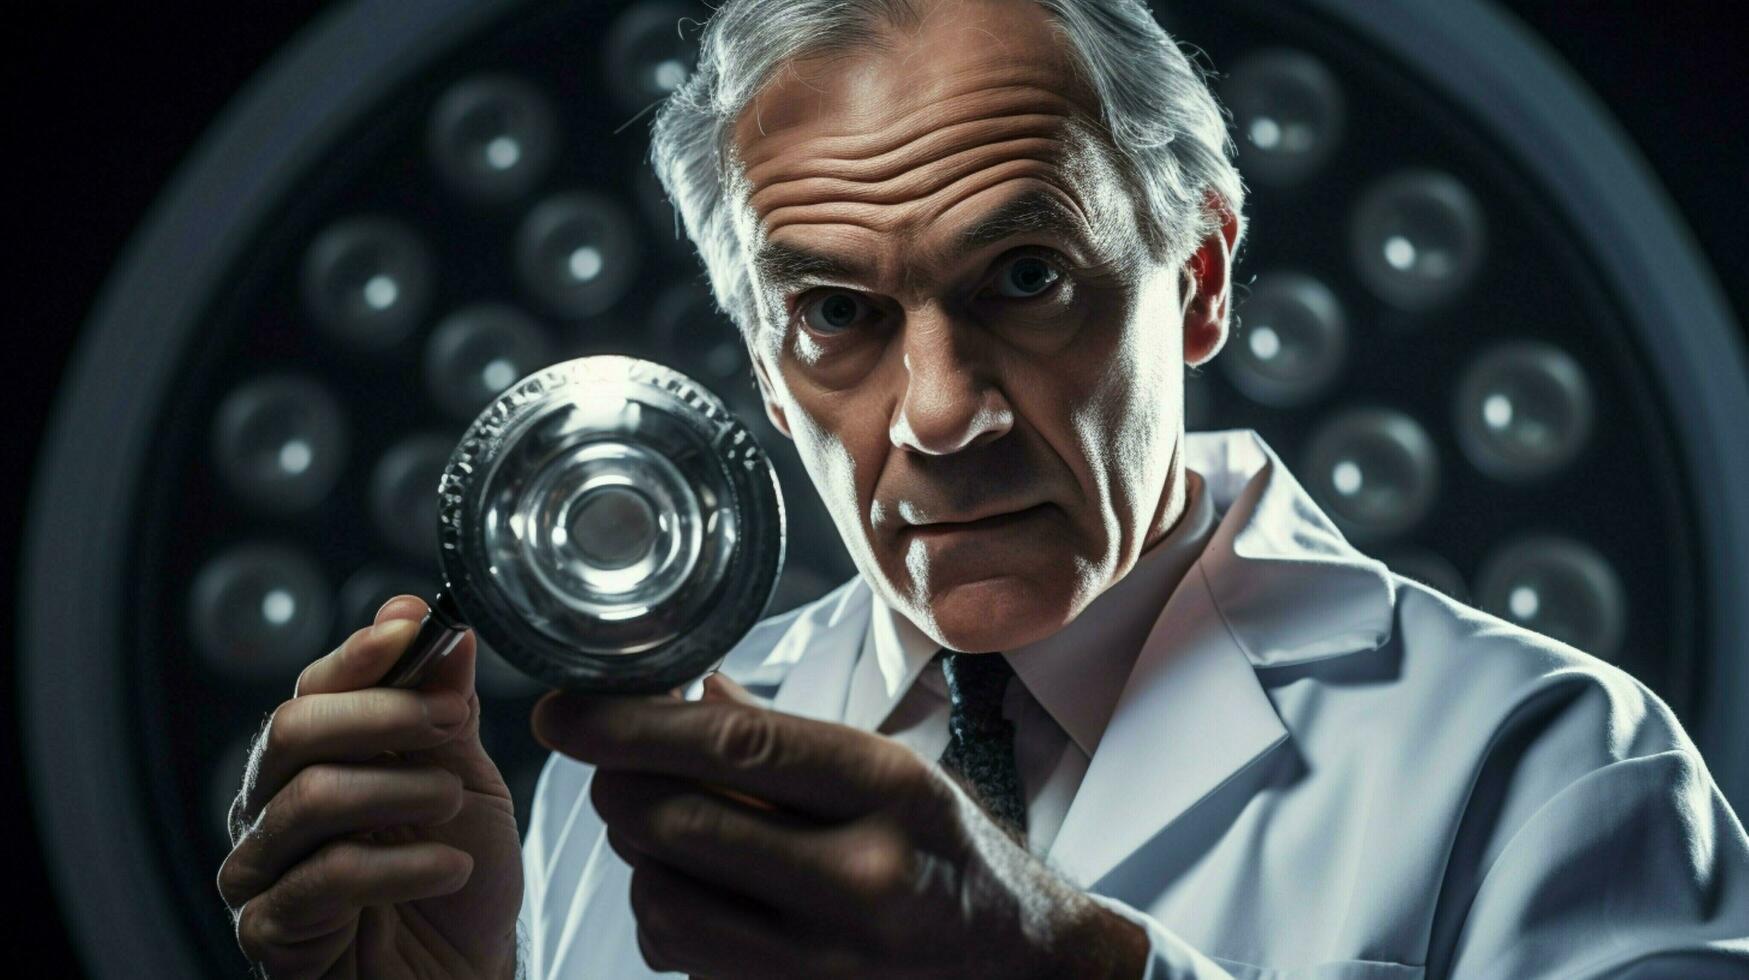 doctor examines with shiny metal diagnostic tool photo